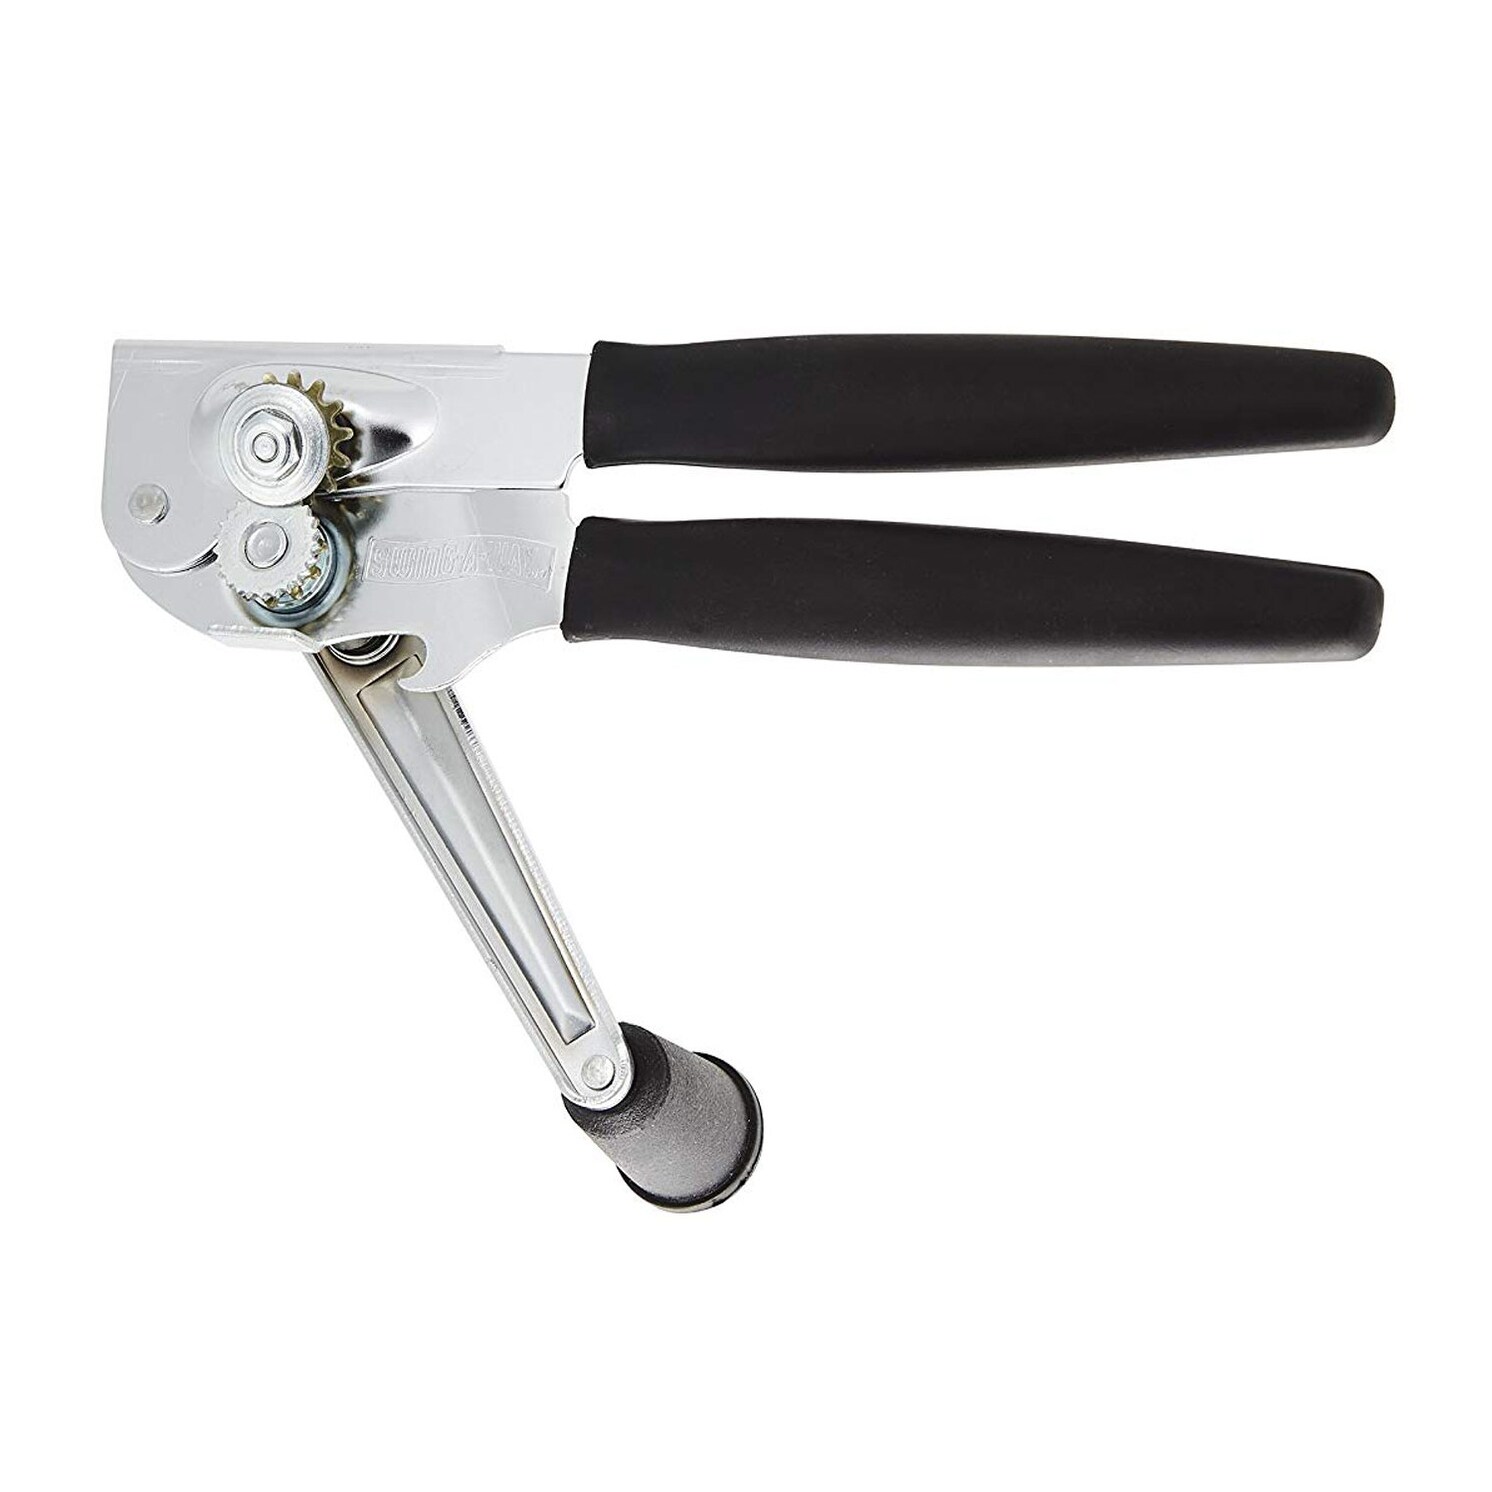 https://ak1.ostkcdn.com/images/products/is/images/direct/4b6b2a00dc2cbb3c3e5a4202d6982eff5c076d23/Swing-A-Way-Easy-Crank-Can-Opener-with-Crank-Handle%2C-Black.jpg